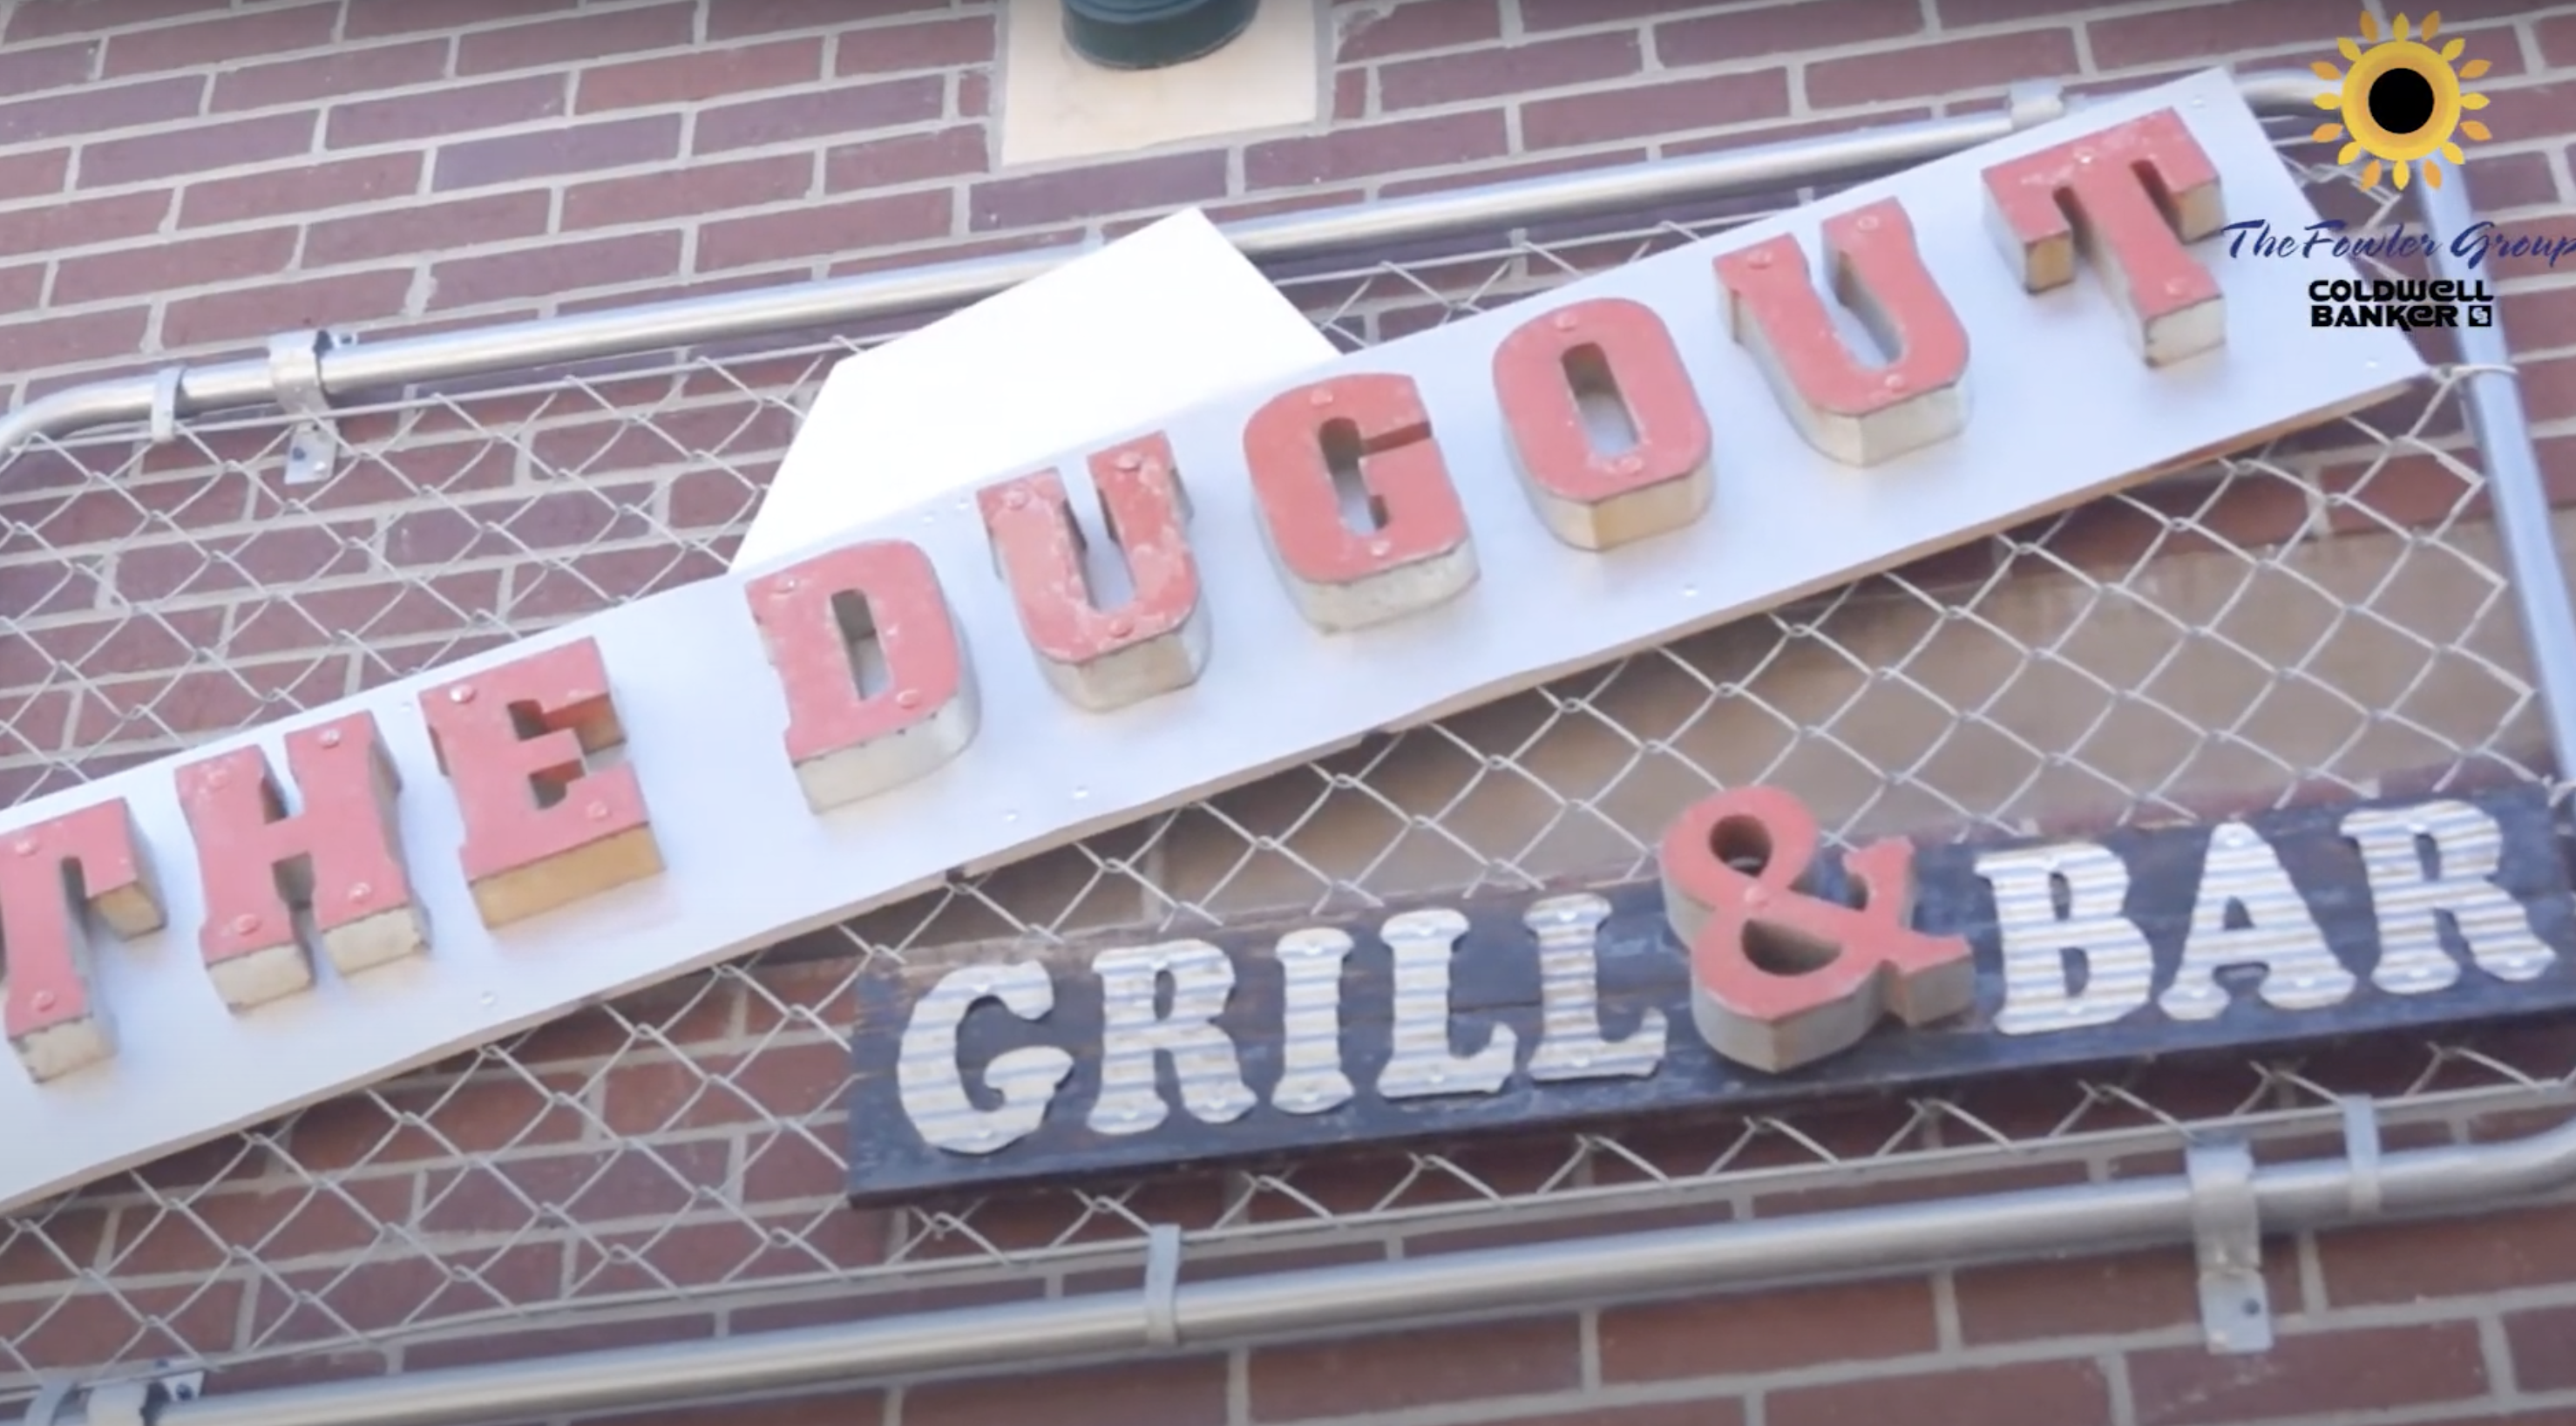 Experience Erie with The dugout grill and bar